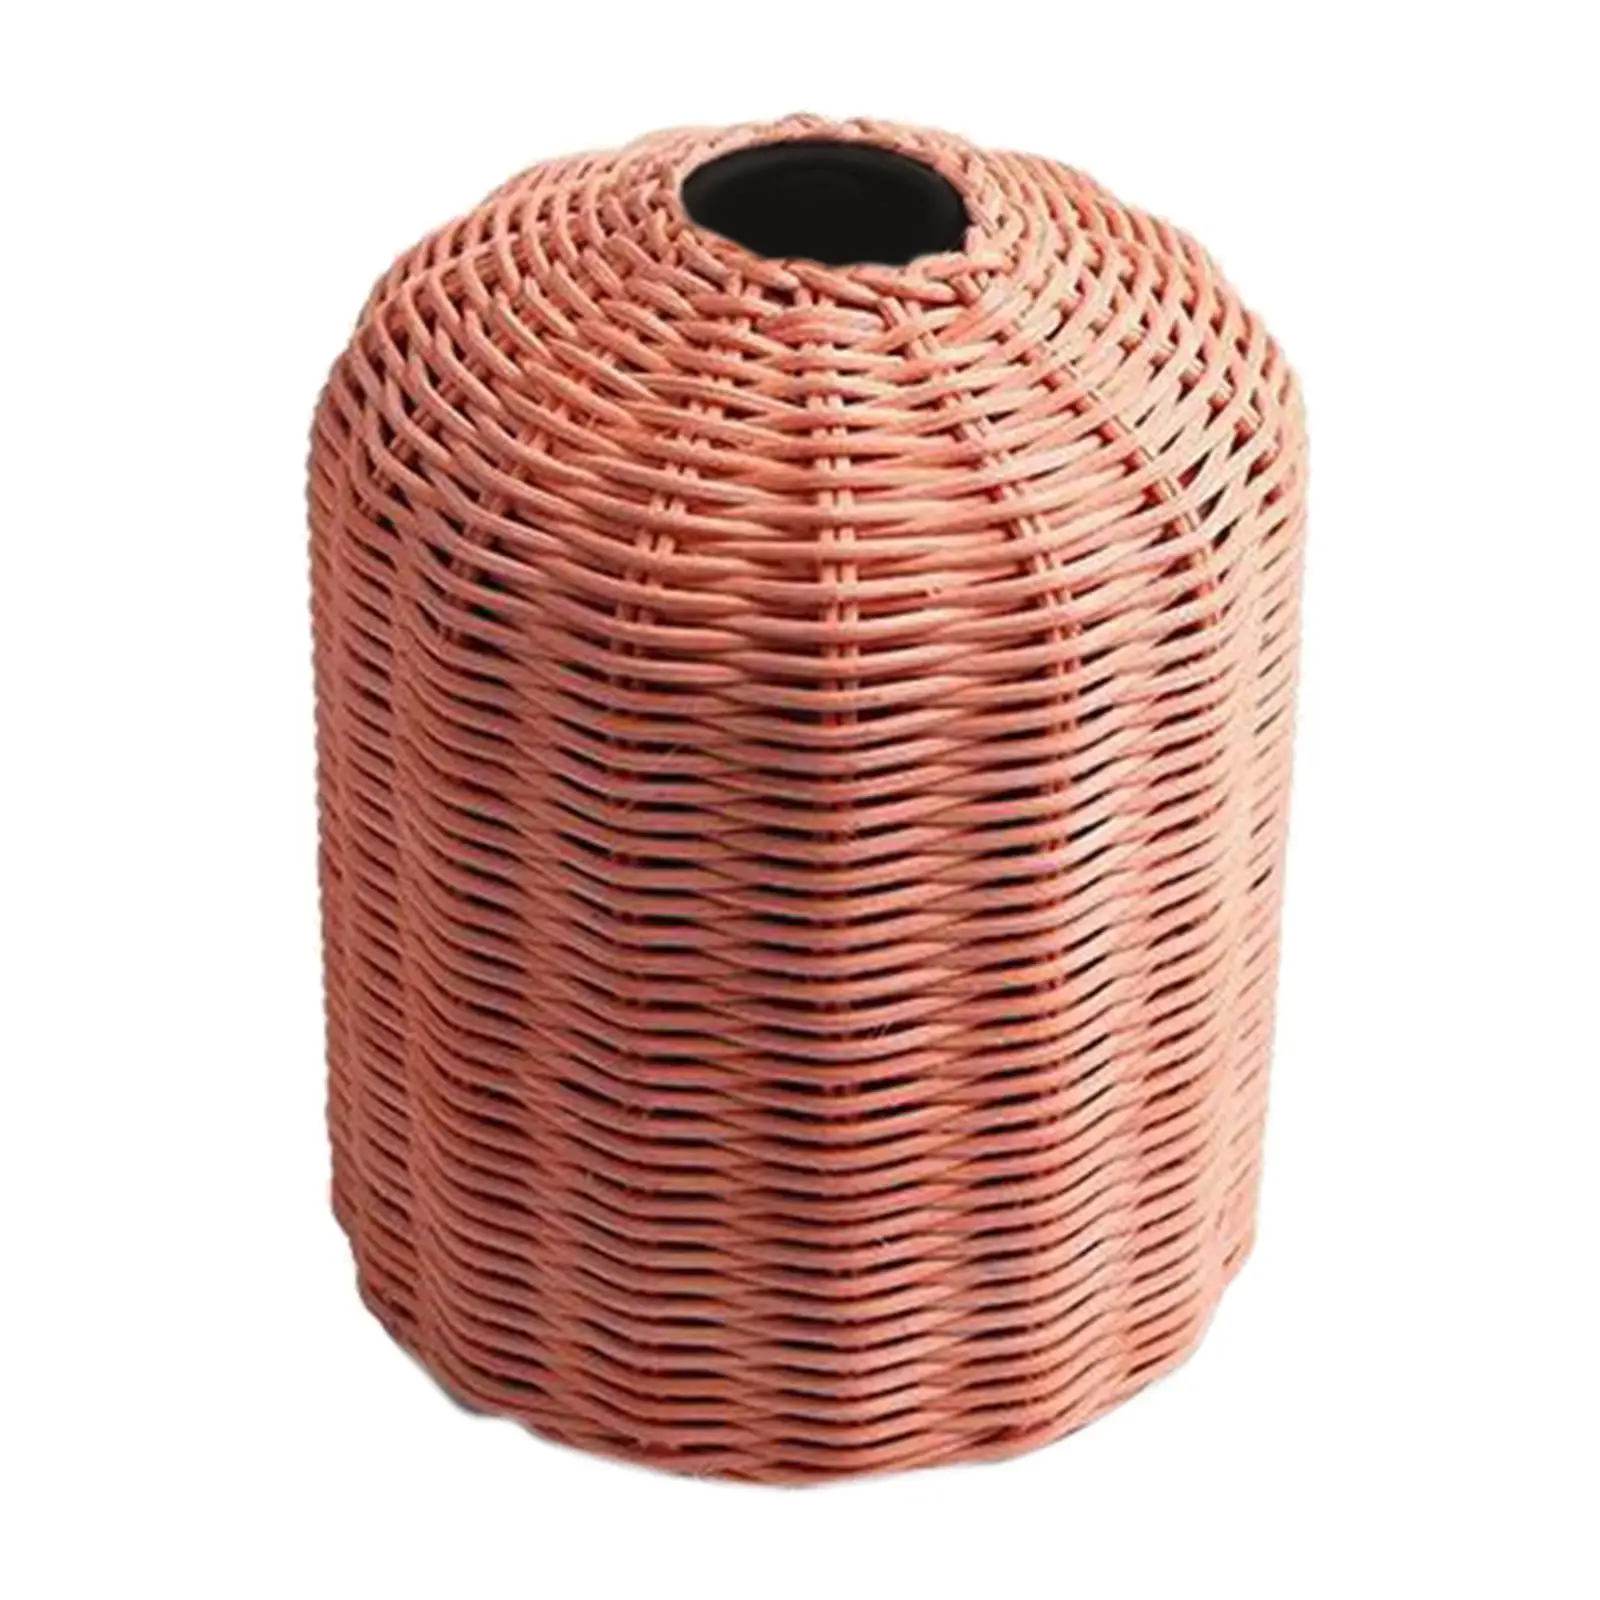 Woven Protective Cooking Gas Cylinder Cover Camping Gas Tank  Pouch